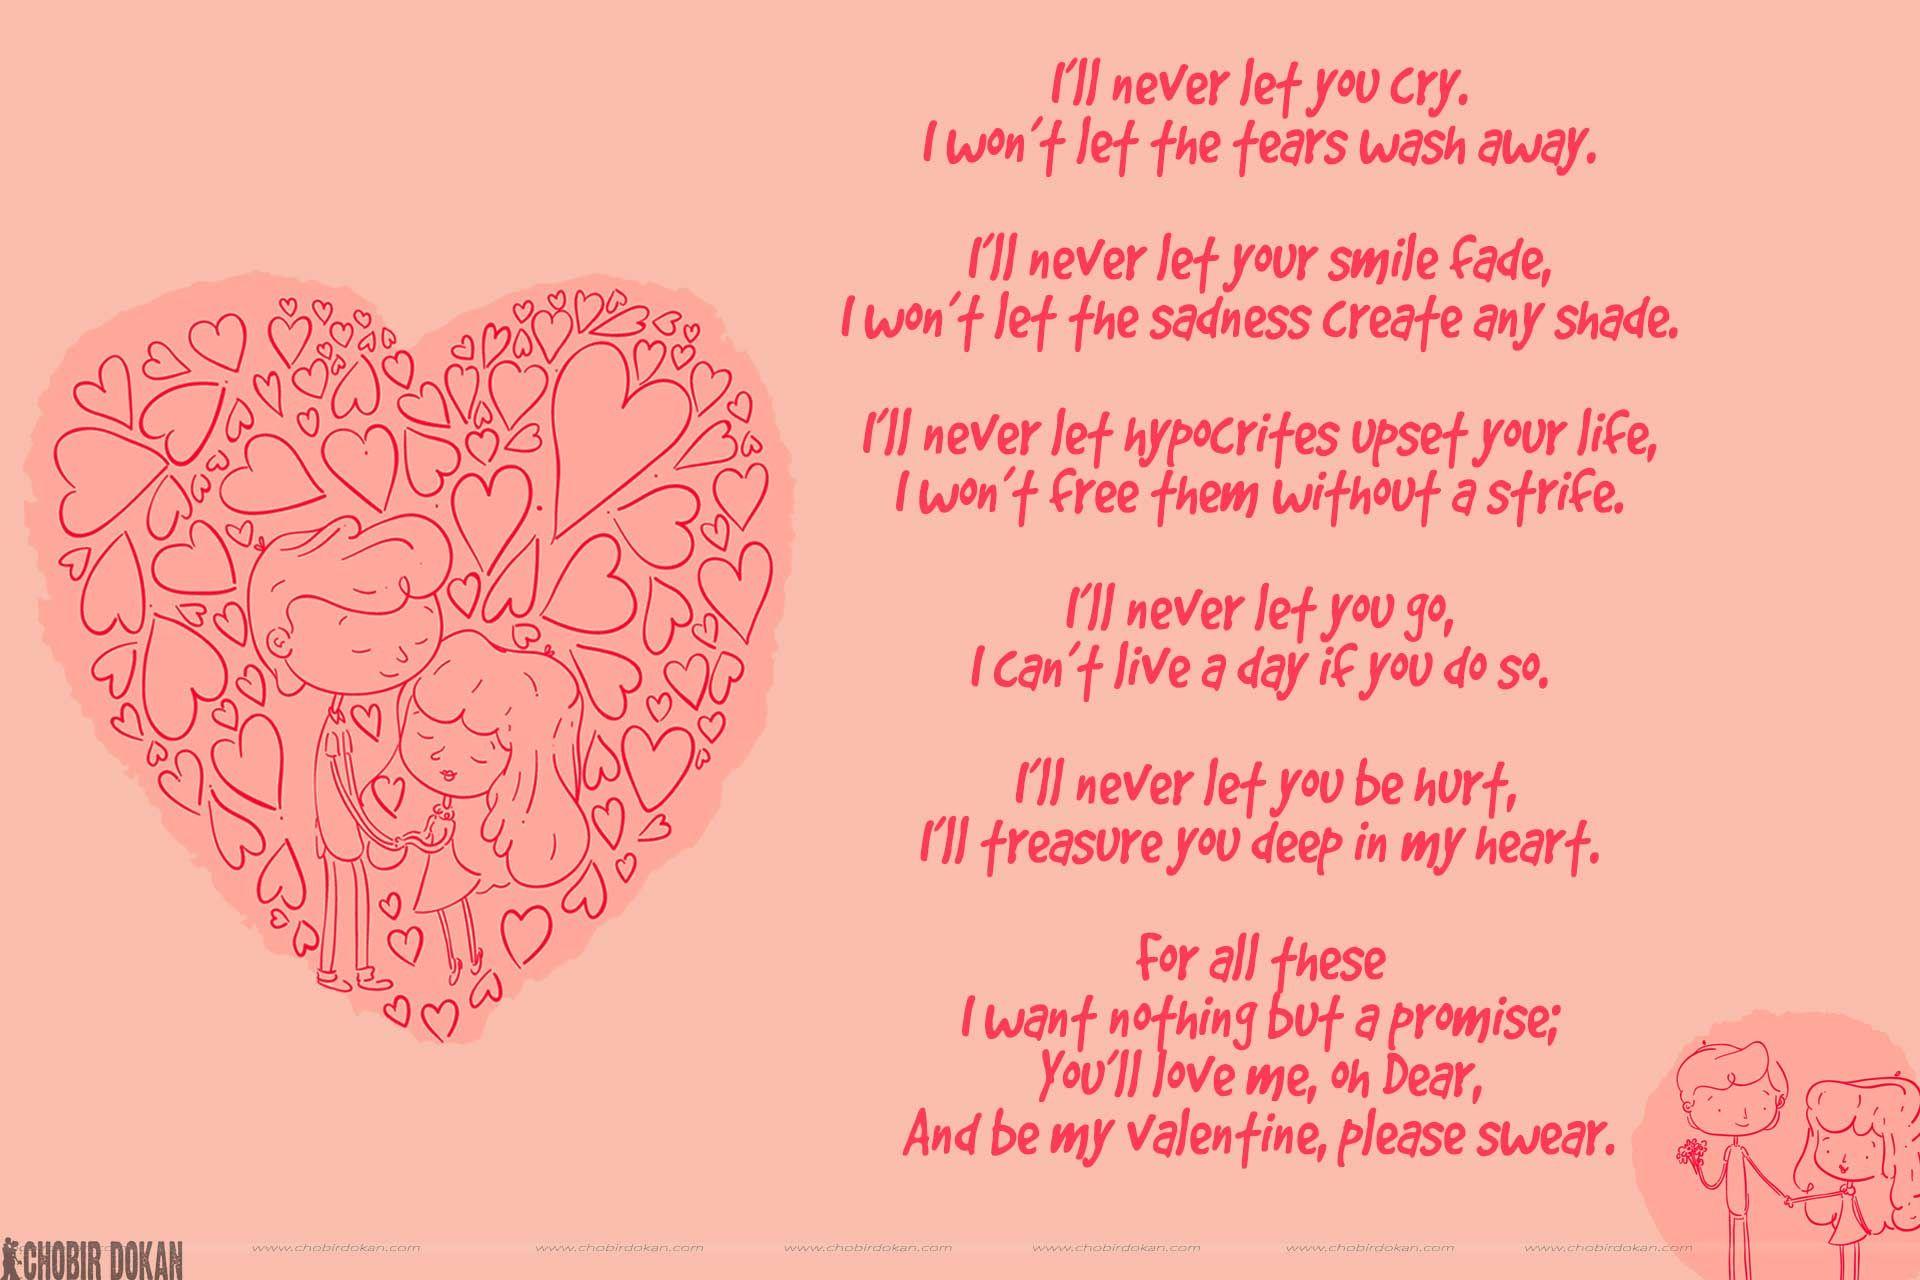 Will You Be My Valentine Poems For Him Her With Image